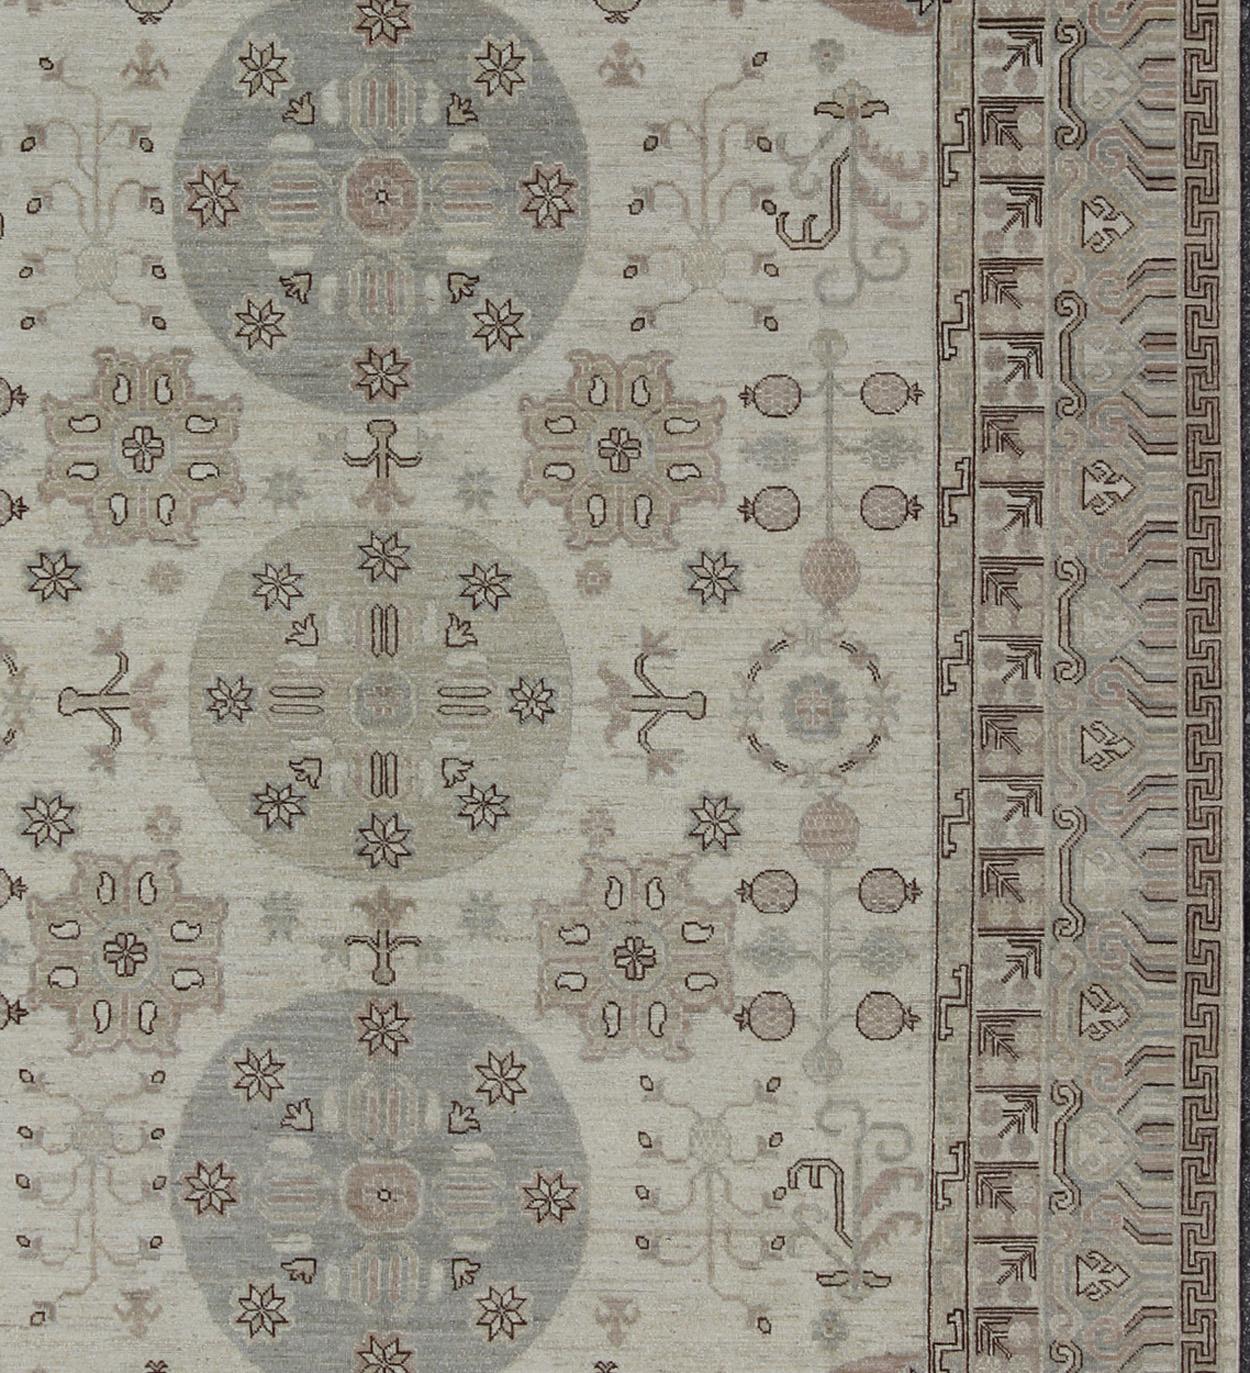 Light color Khotan rug, Afghanistan made fine piece, with circular Medallions in Gray, Tan, Cream, brown and light blue, rug/MP-1703-1613 country of origin / type: Afghanistan / Khotan

This Khotan features a traditional Khotan and Samarkand